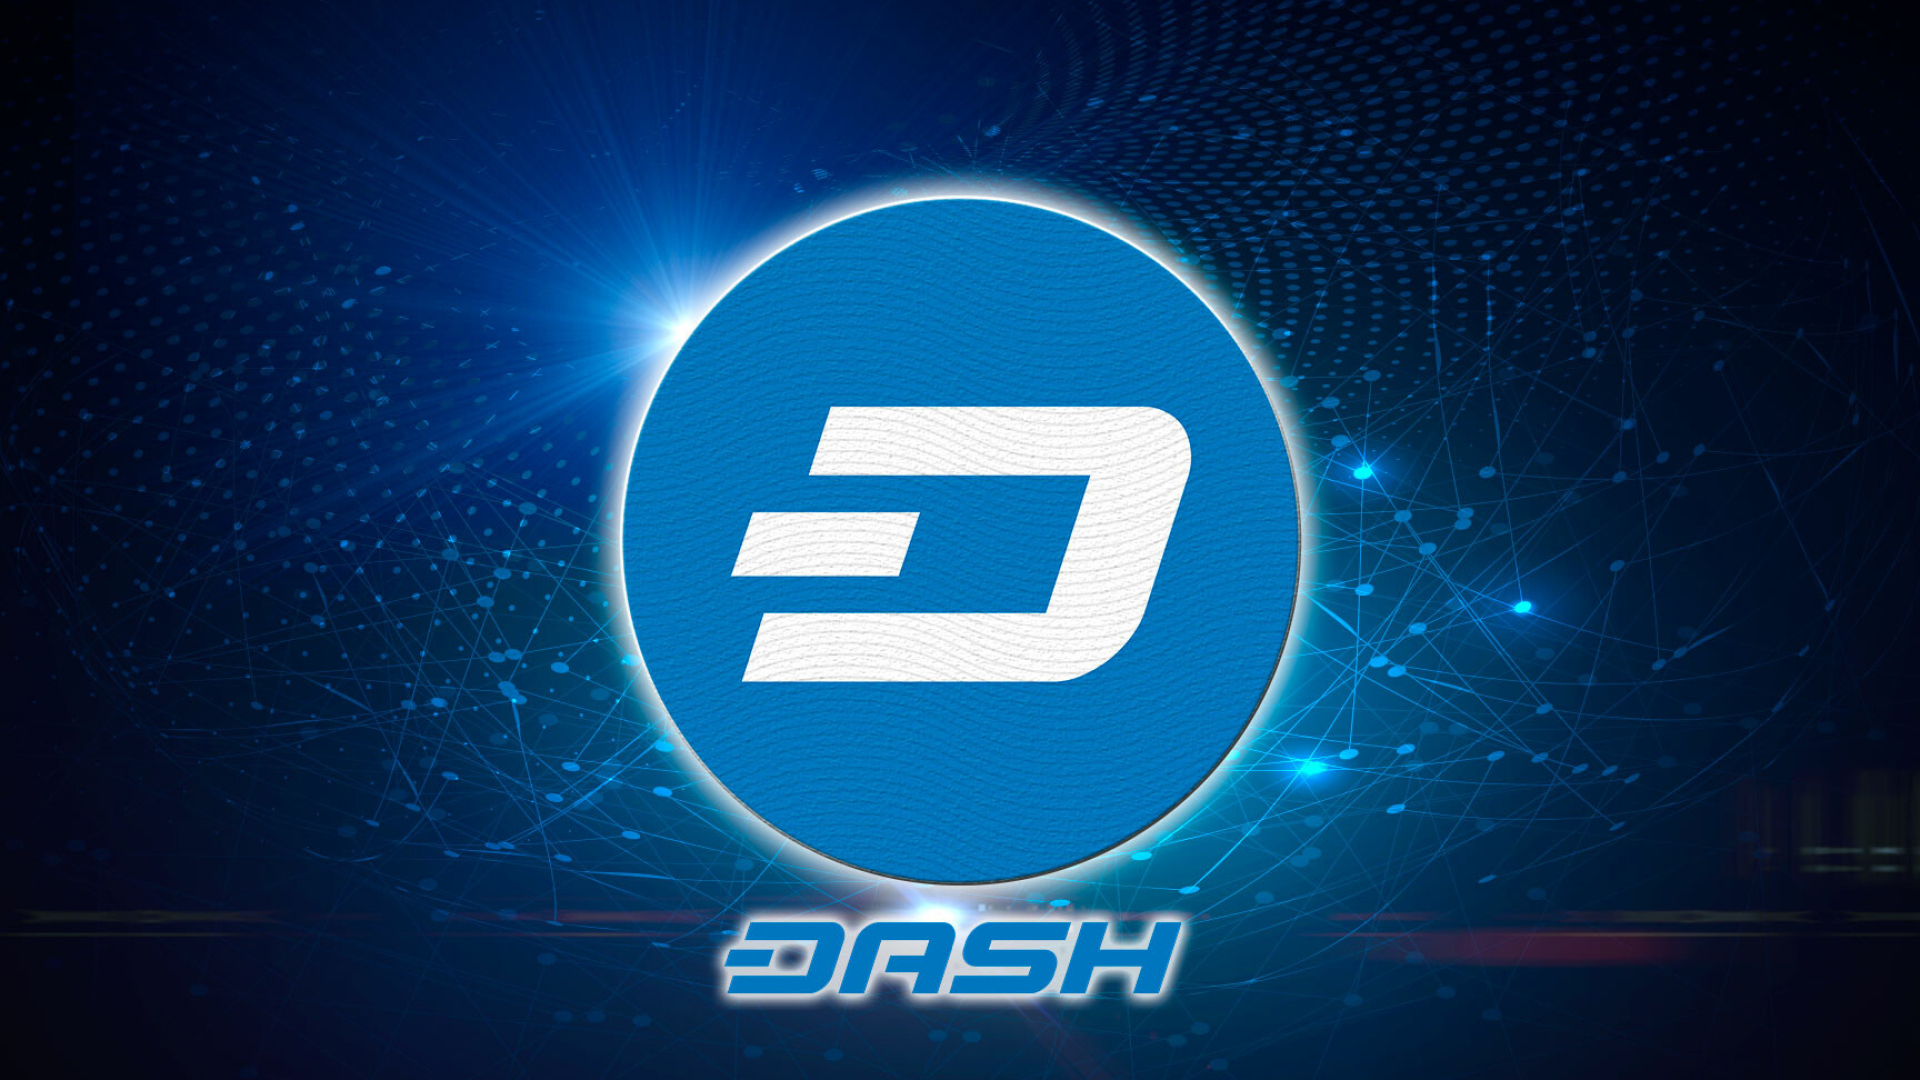 Cryptocurrency: Dash, An open source cryptocurrency, Altcoin. 1920x1080 Full HD Wallpaper.